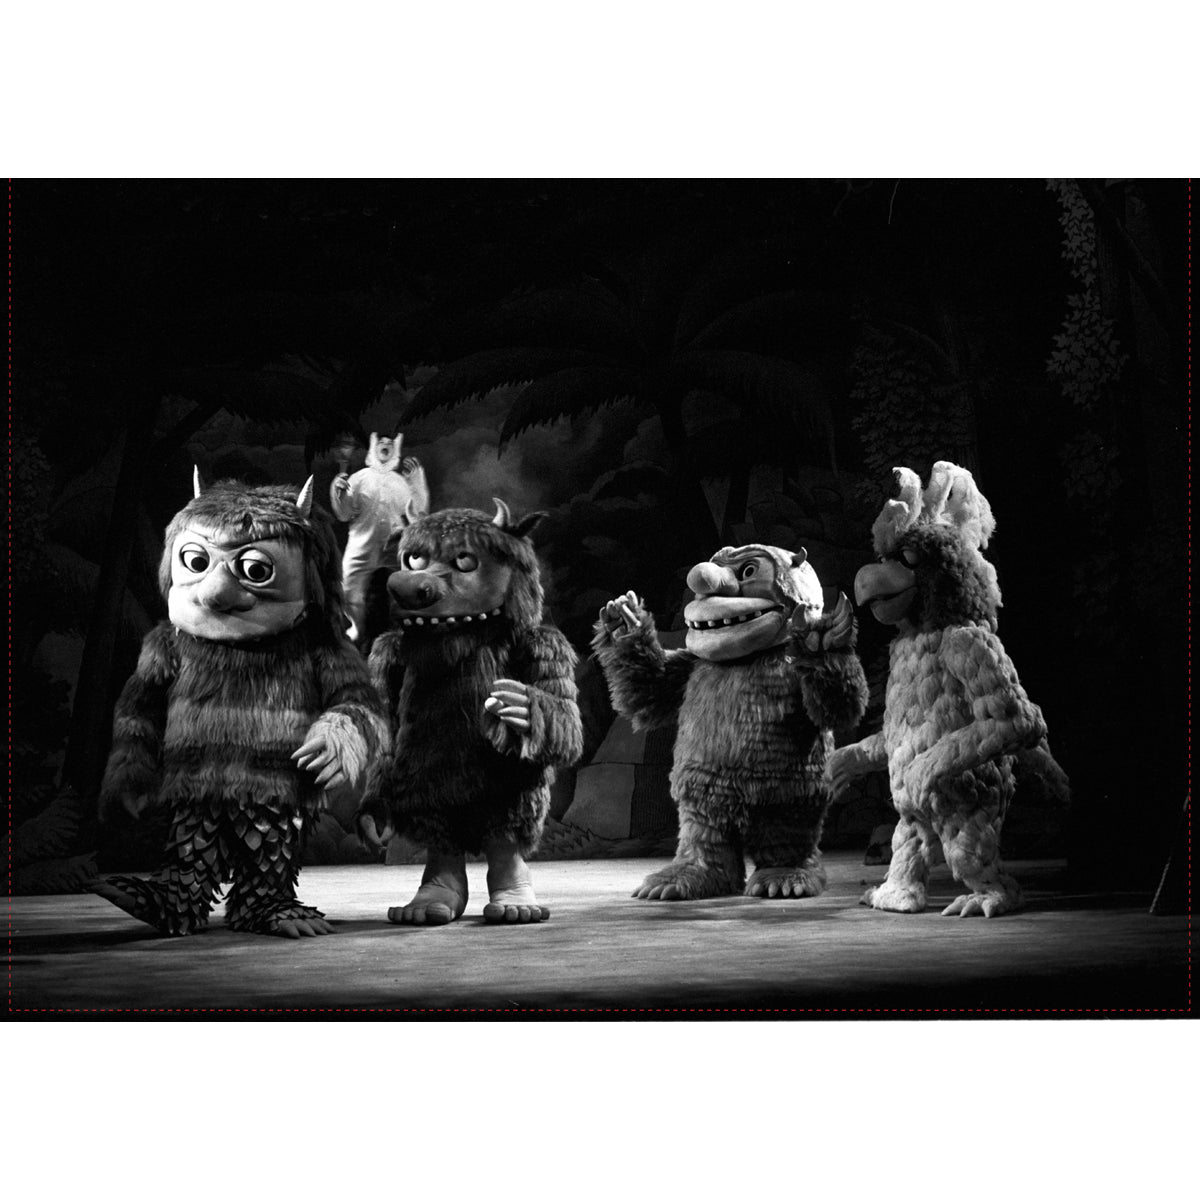 Where the Wild Things Are 1985 Greetings Card